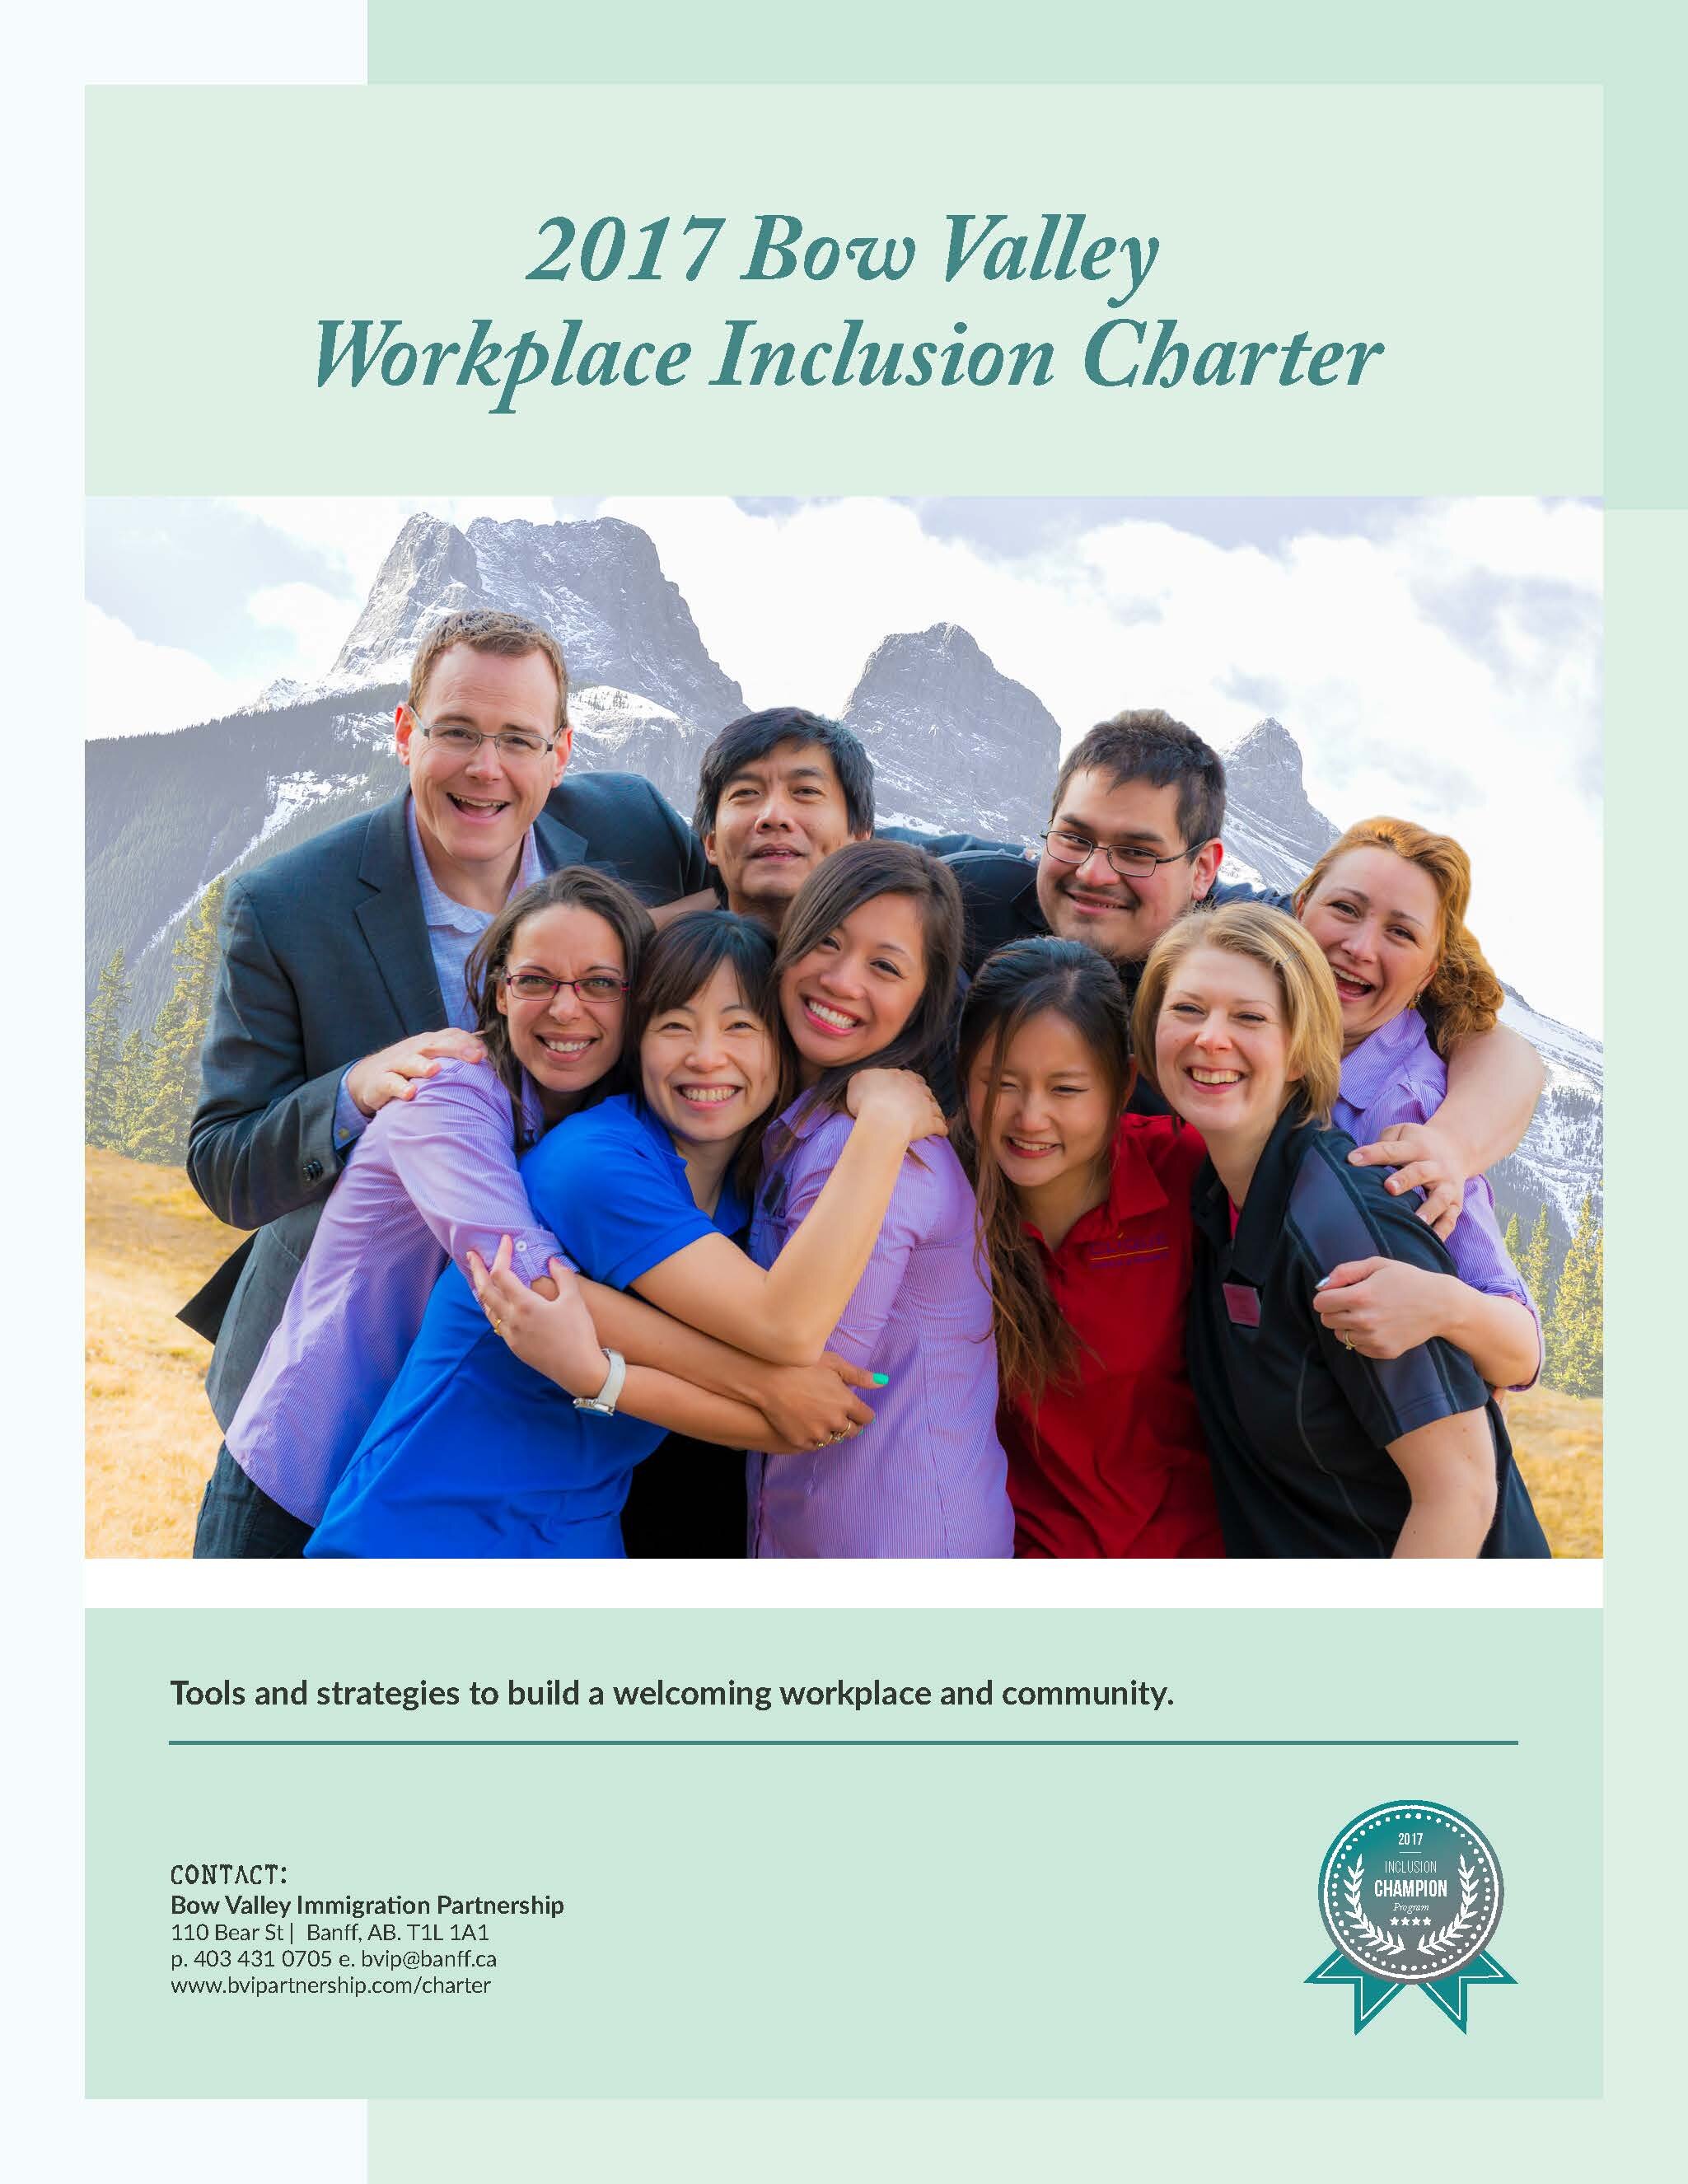 Bow+Valley+Workplace+Inclusion+Charter+2017 (2)_Page_01.jpg